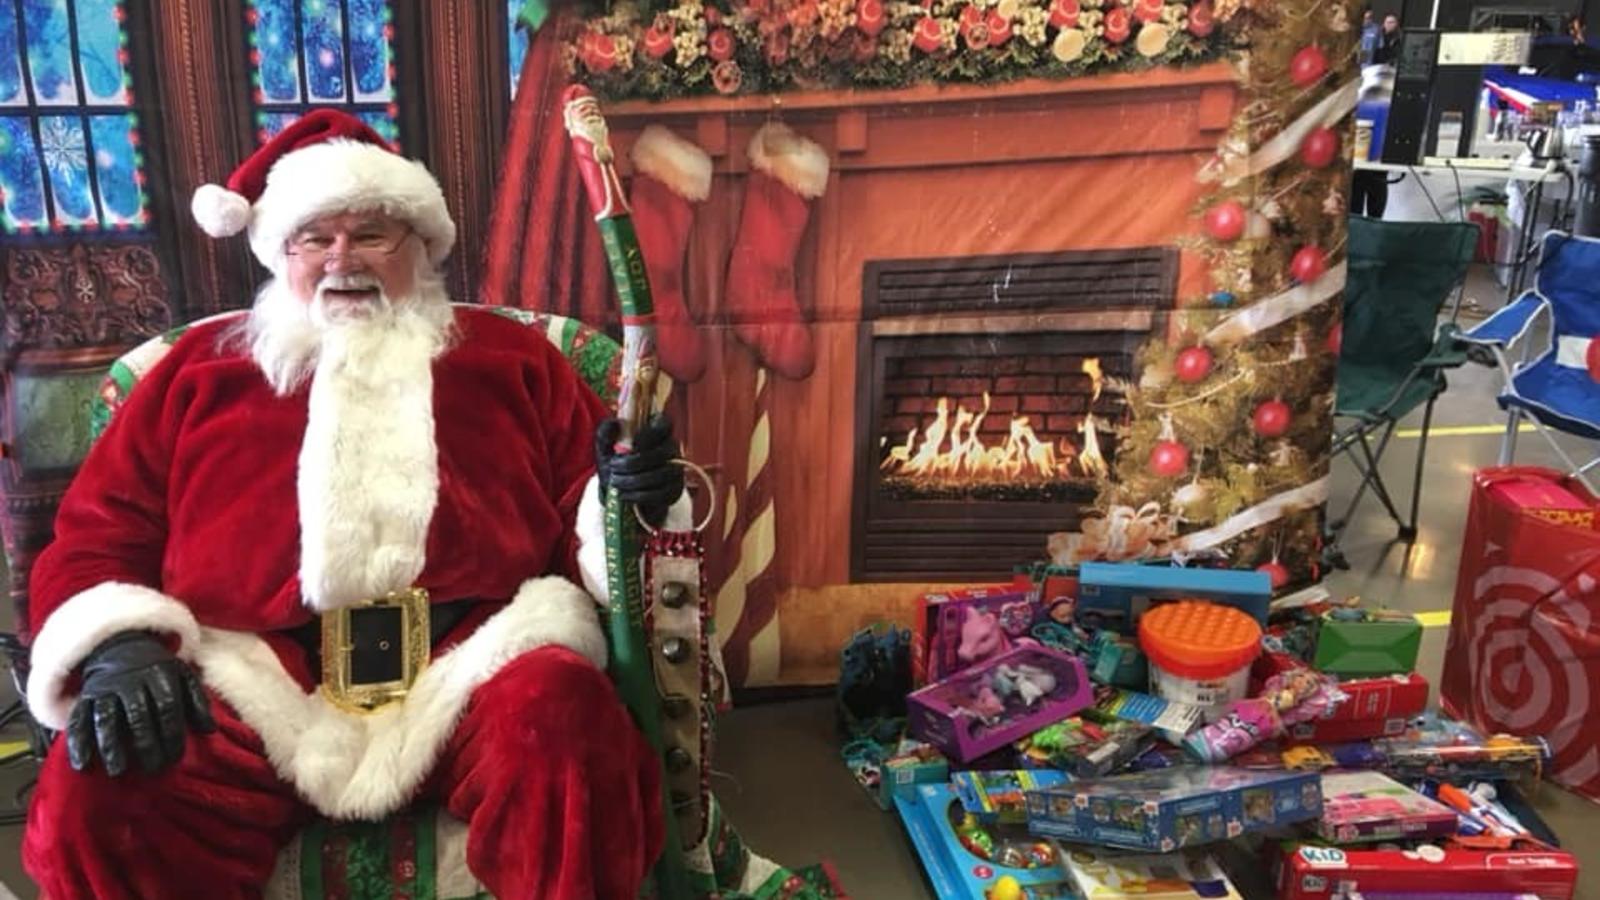 Santa Claus spreads cheer to all at the annual Toys for Tots campaign